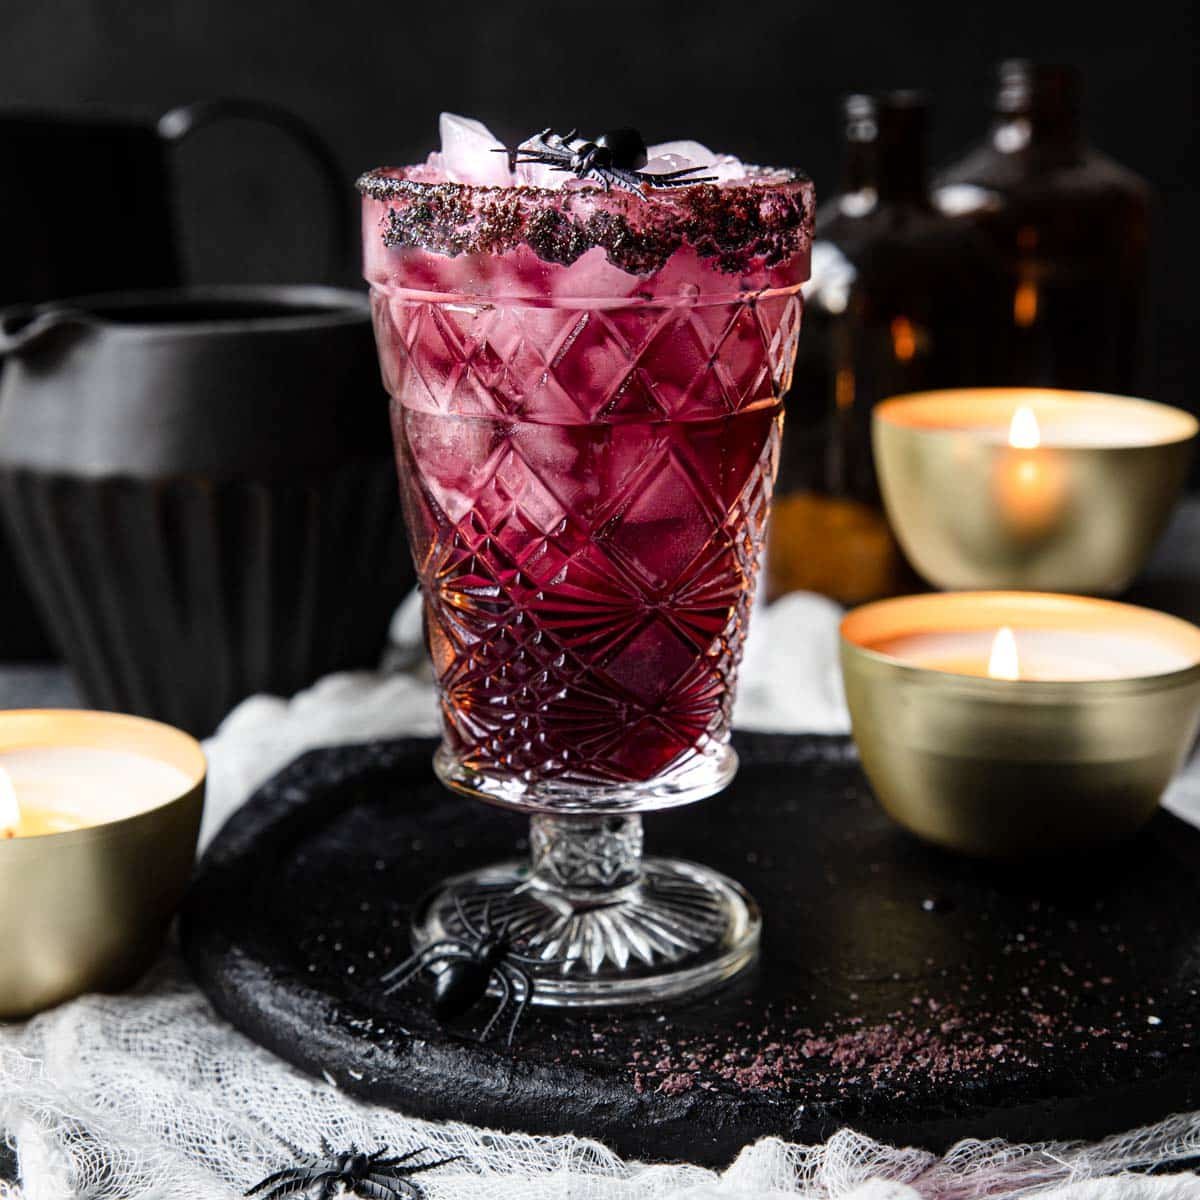 Purple margarita with fake spiders around and candles lit